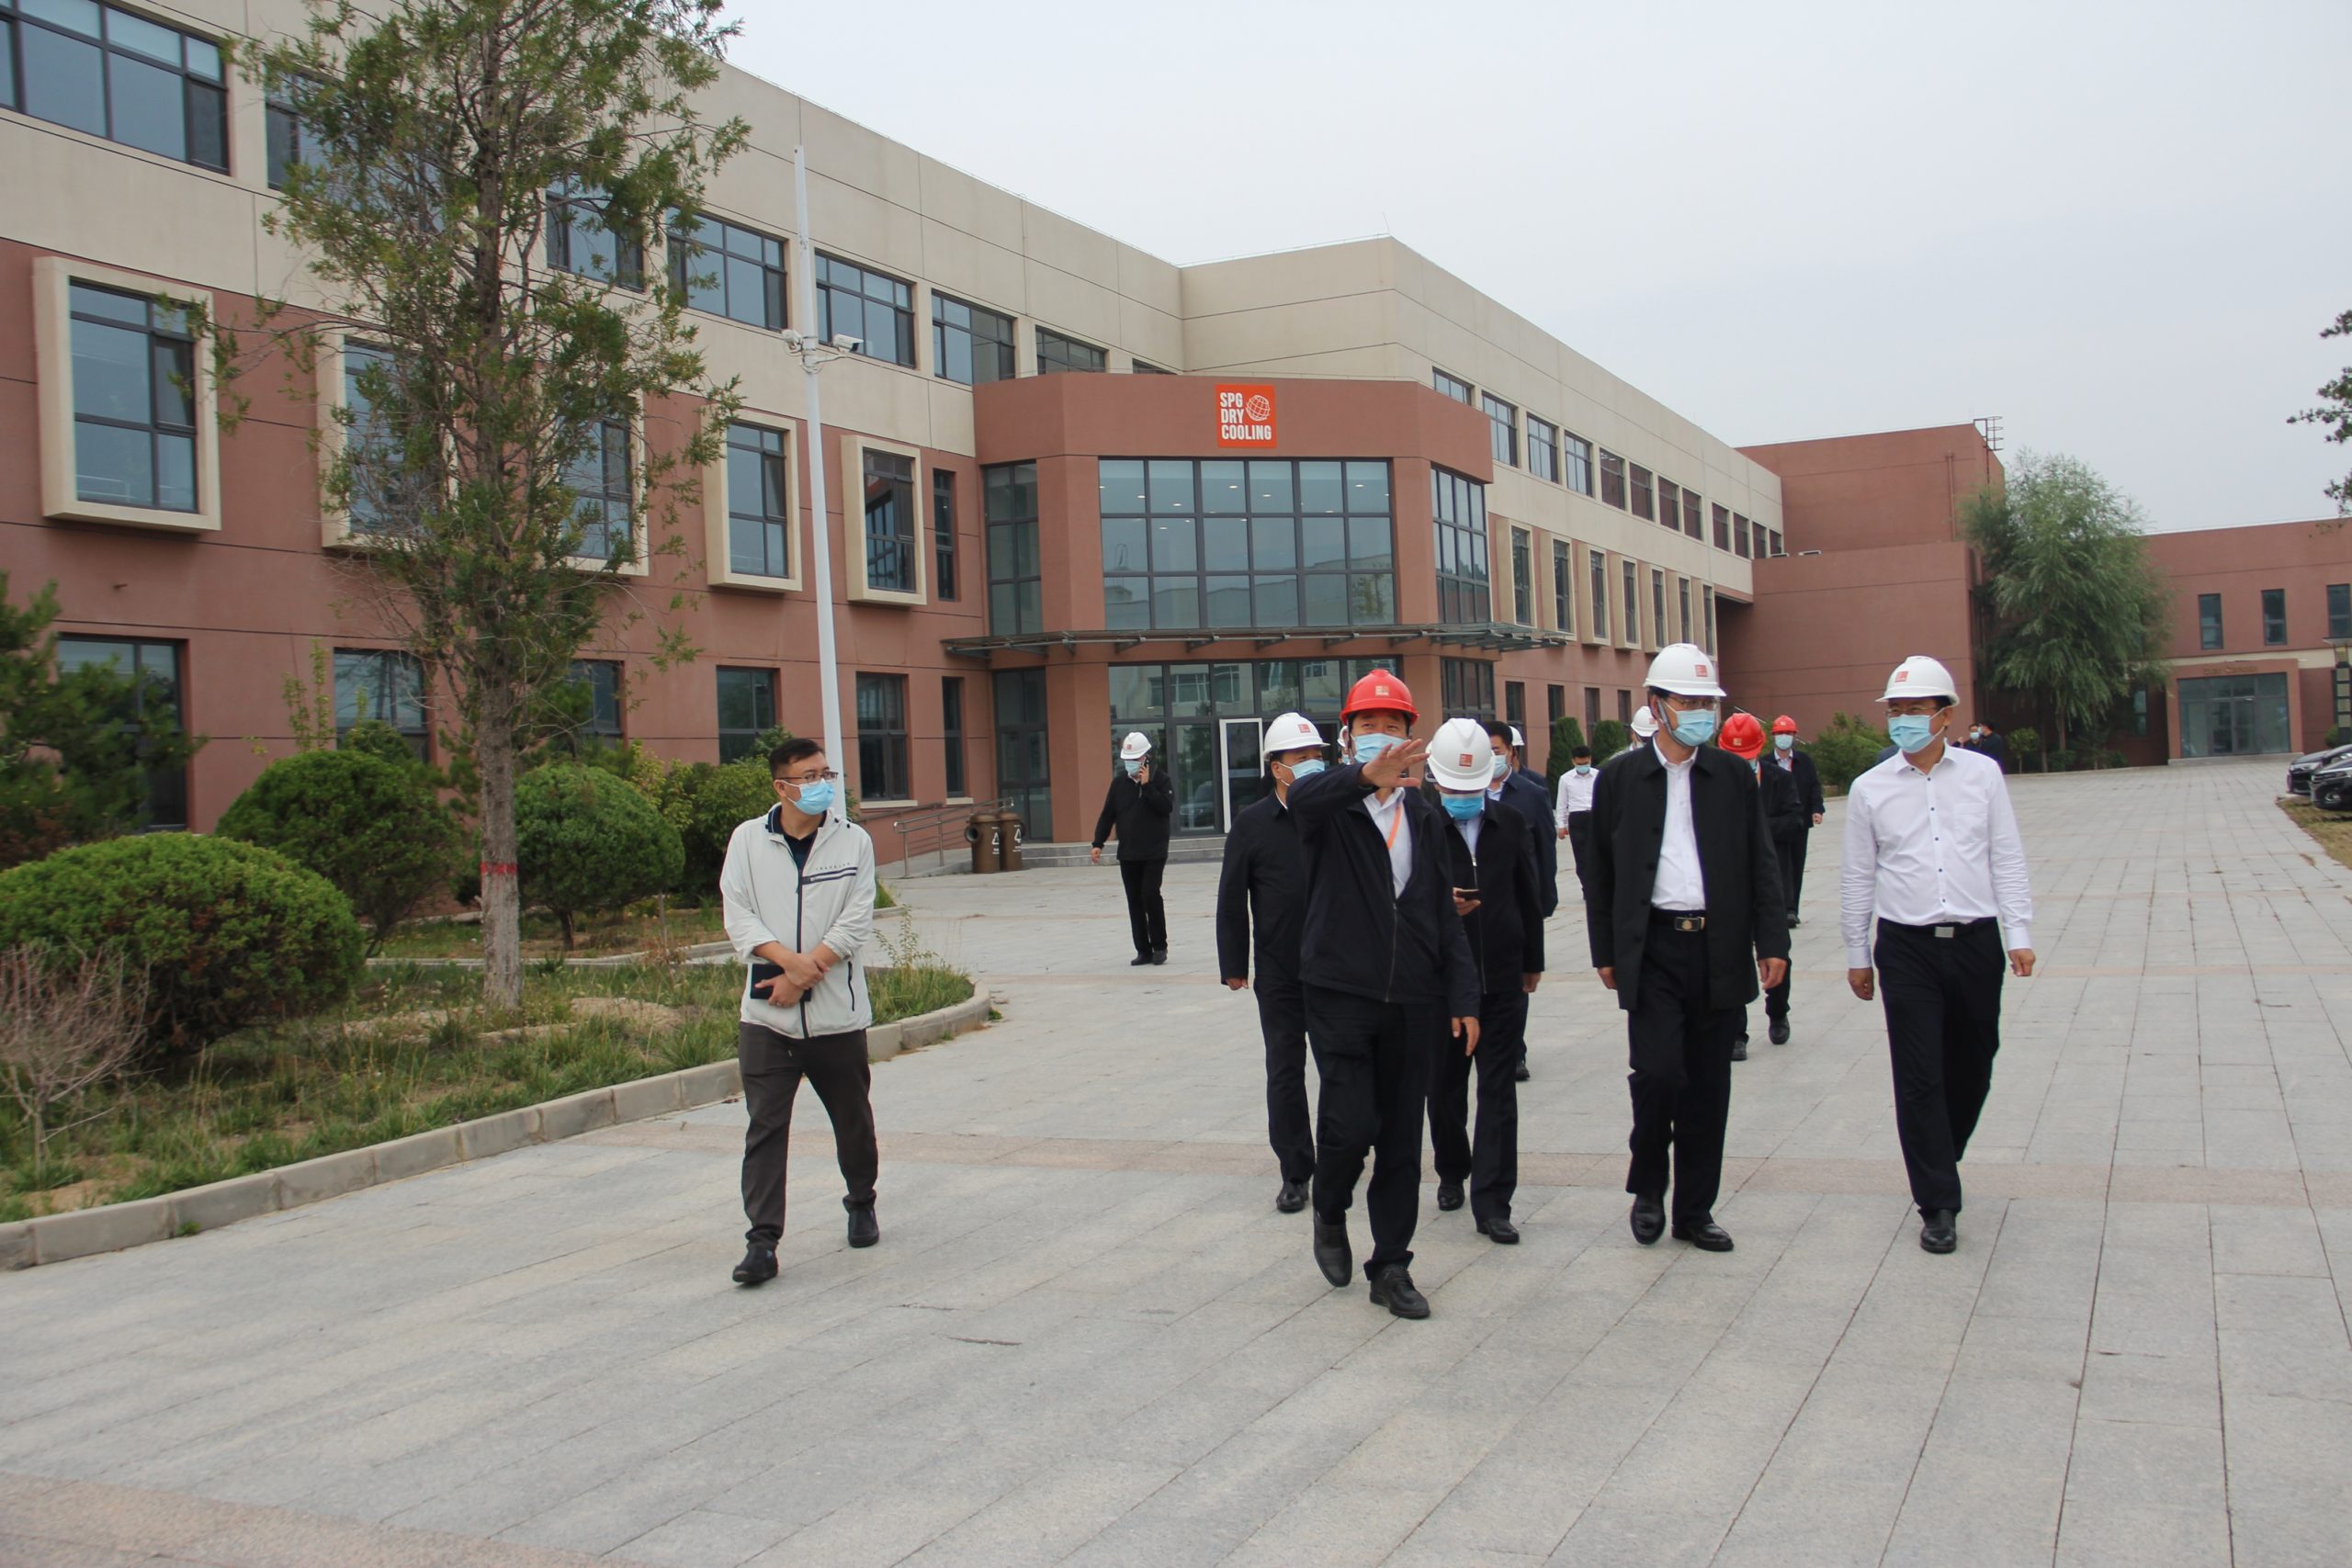 visit in manufacturing plant in Zhangjiakou (China), talking about global material shortage and energy crisis